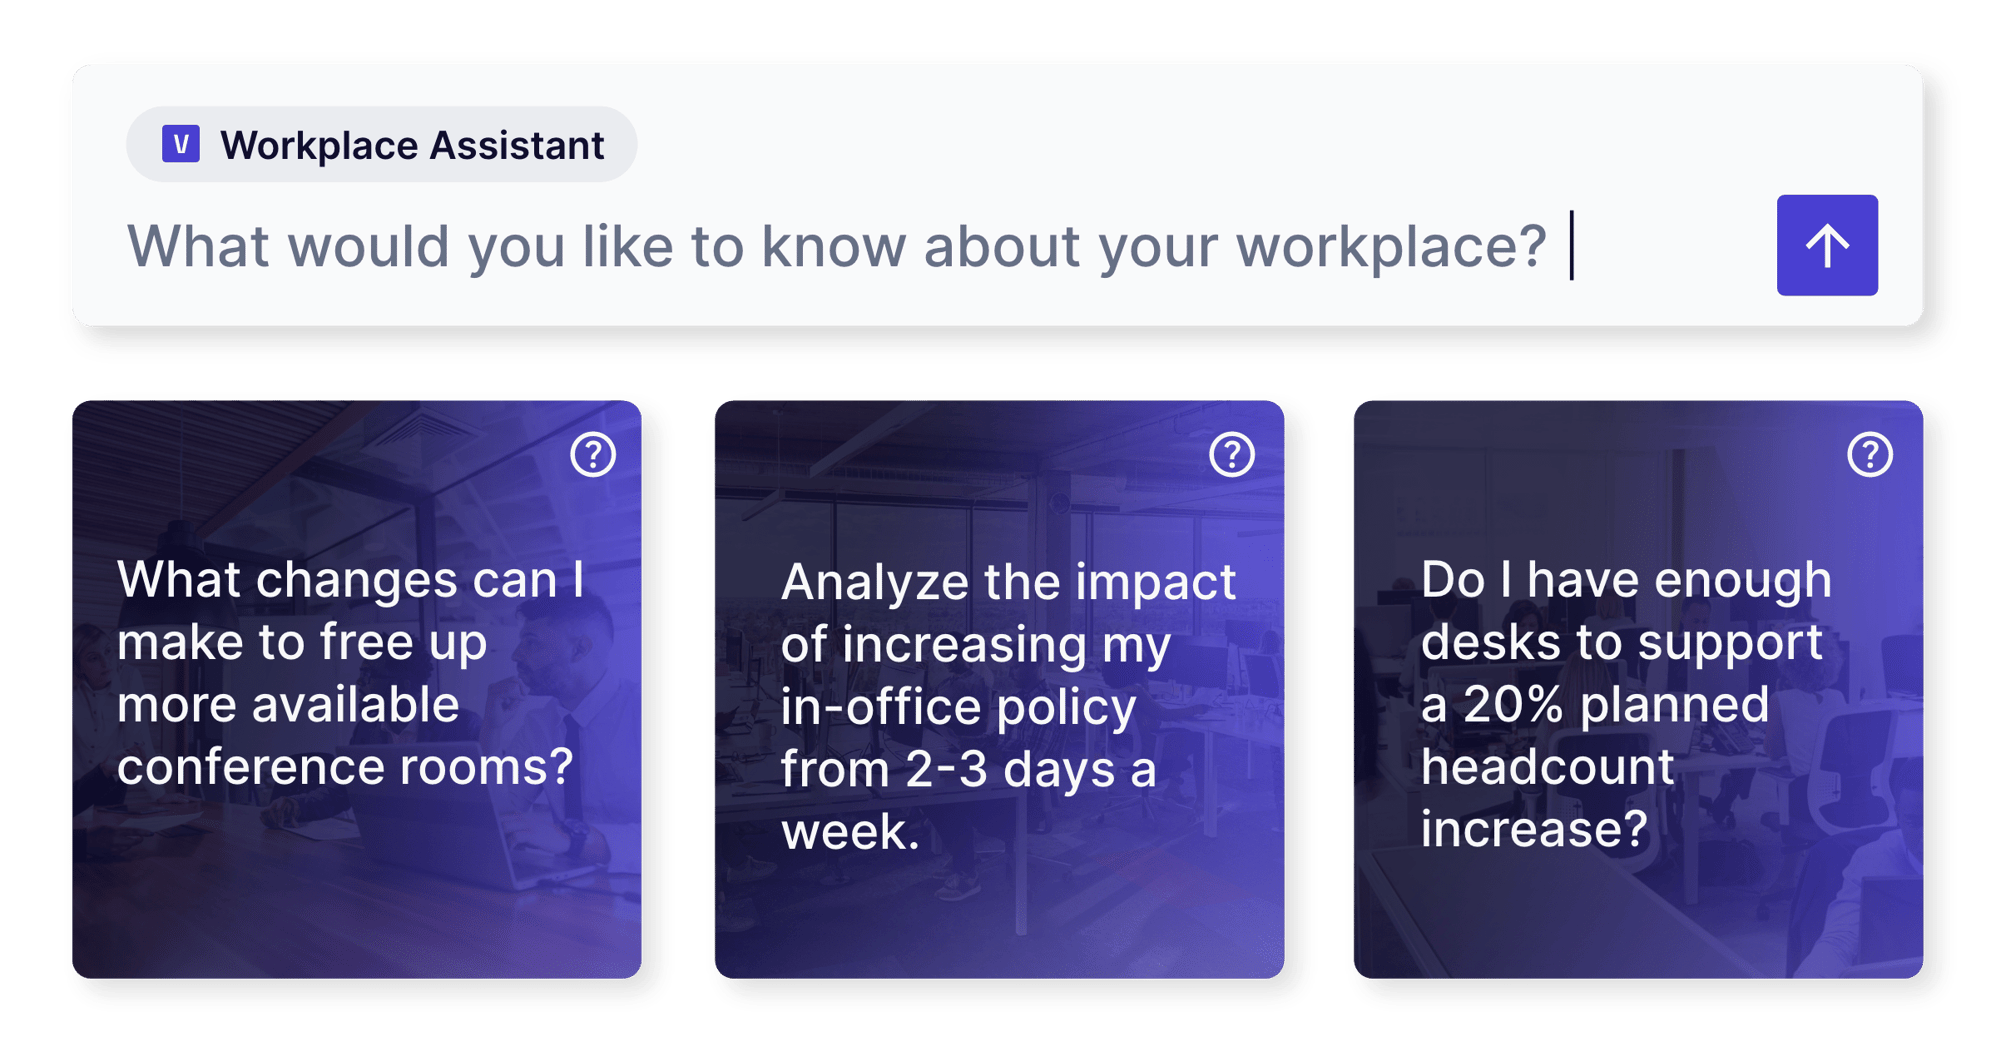 Workplace Assistant example prompts